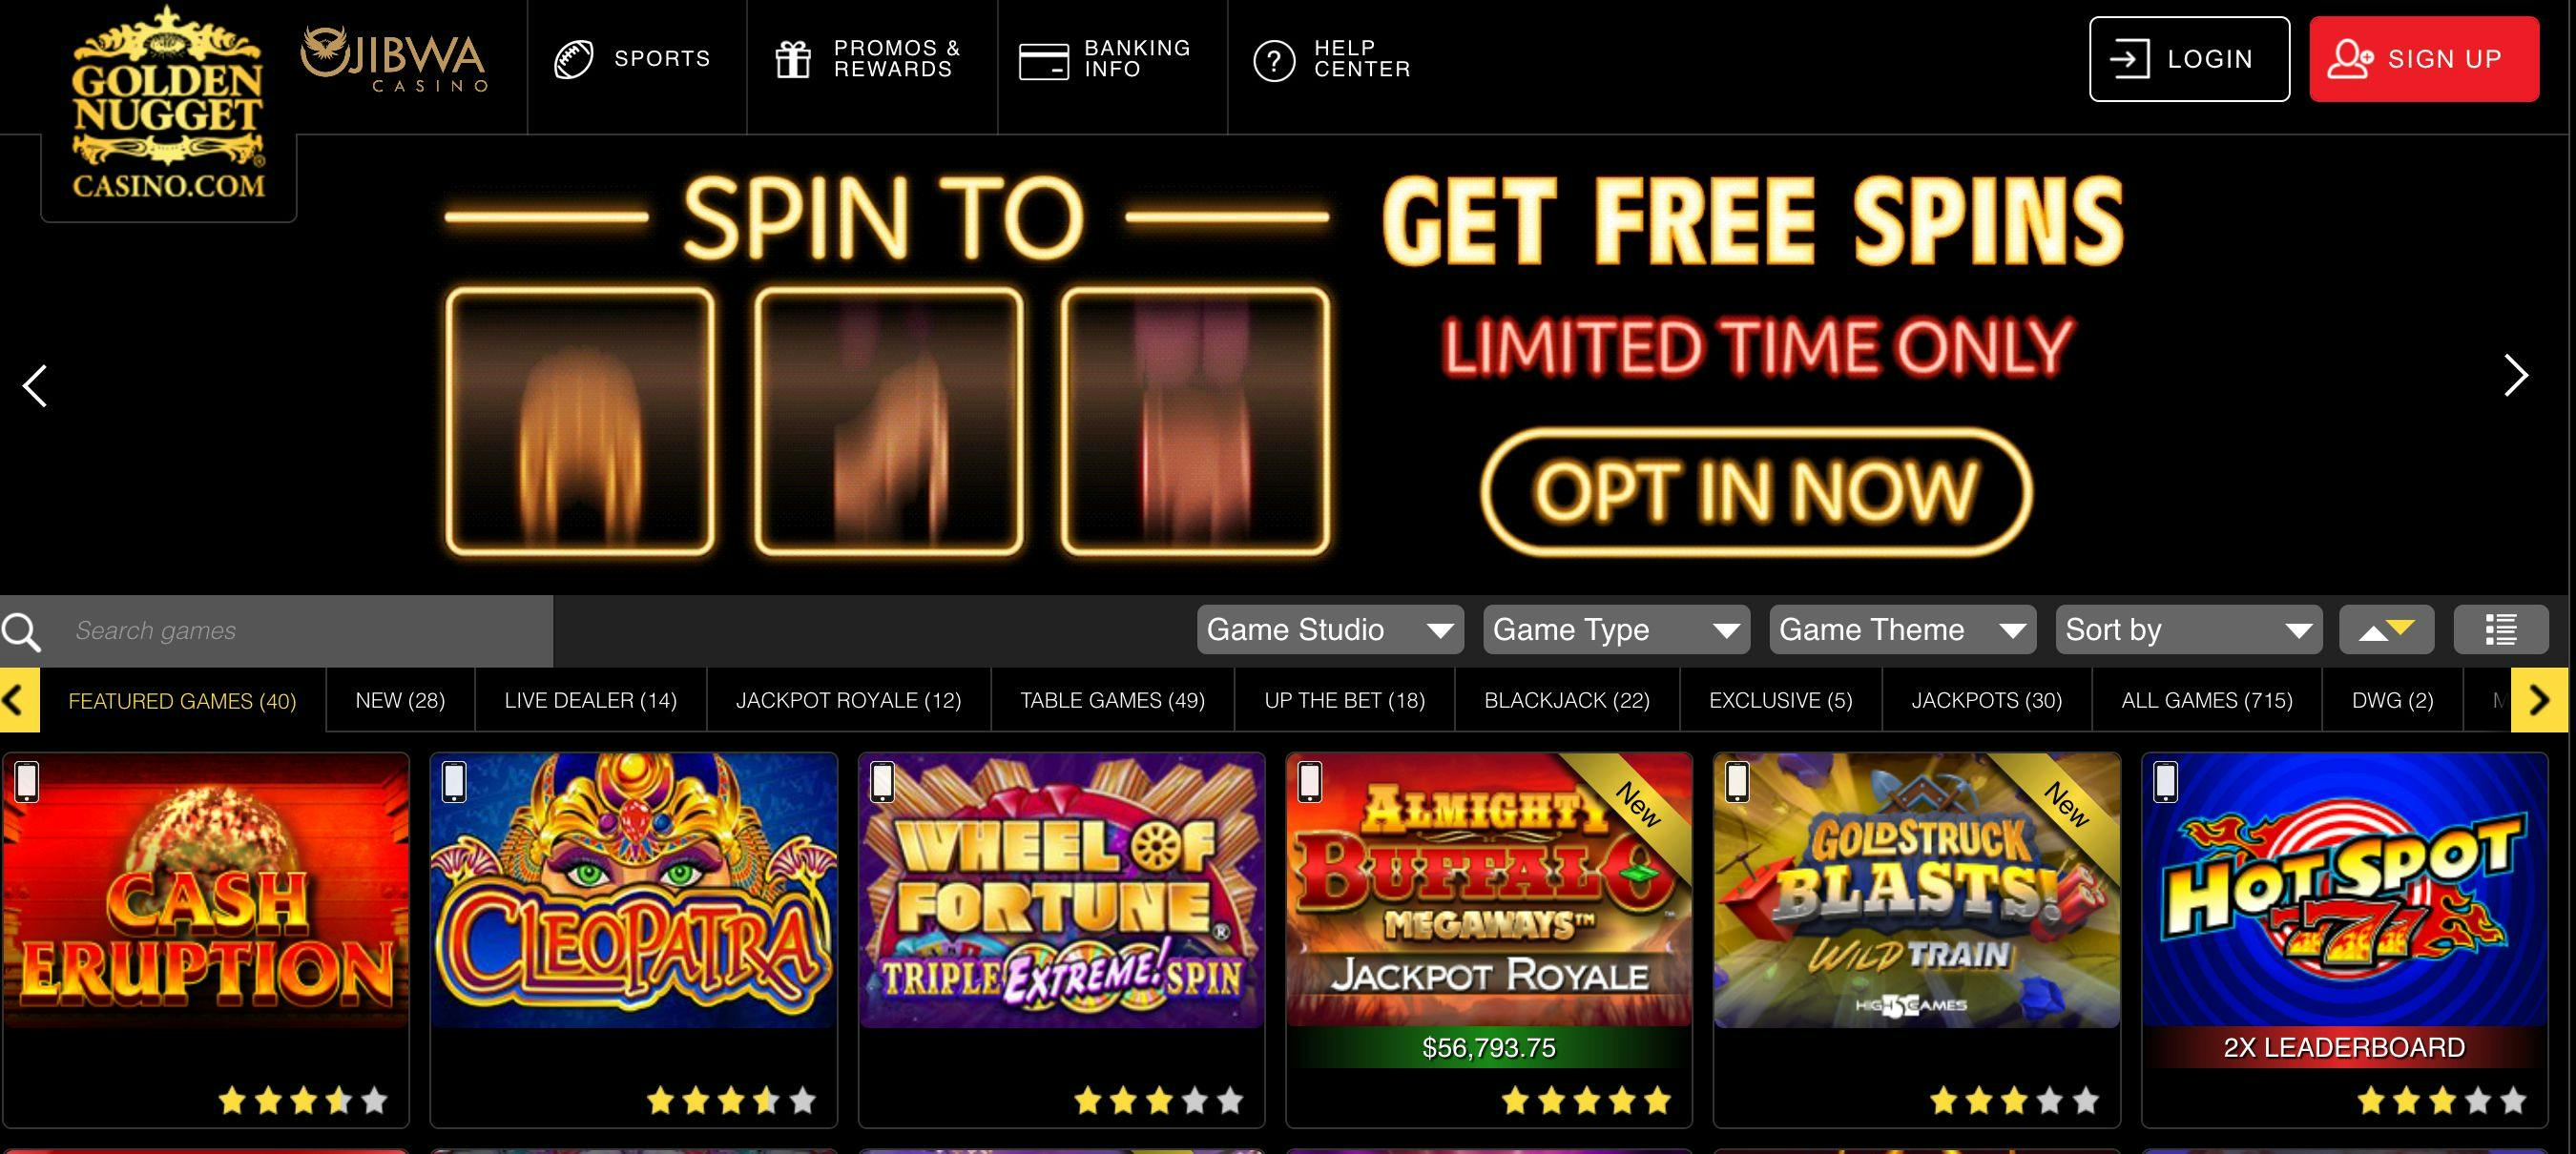 Image of the home page of the Michigan Golden Nugget Casino